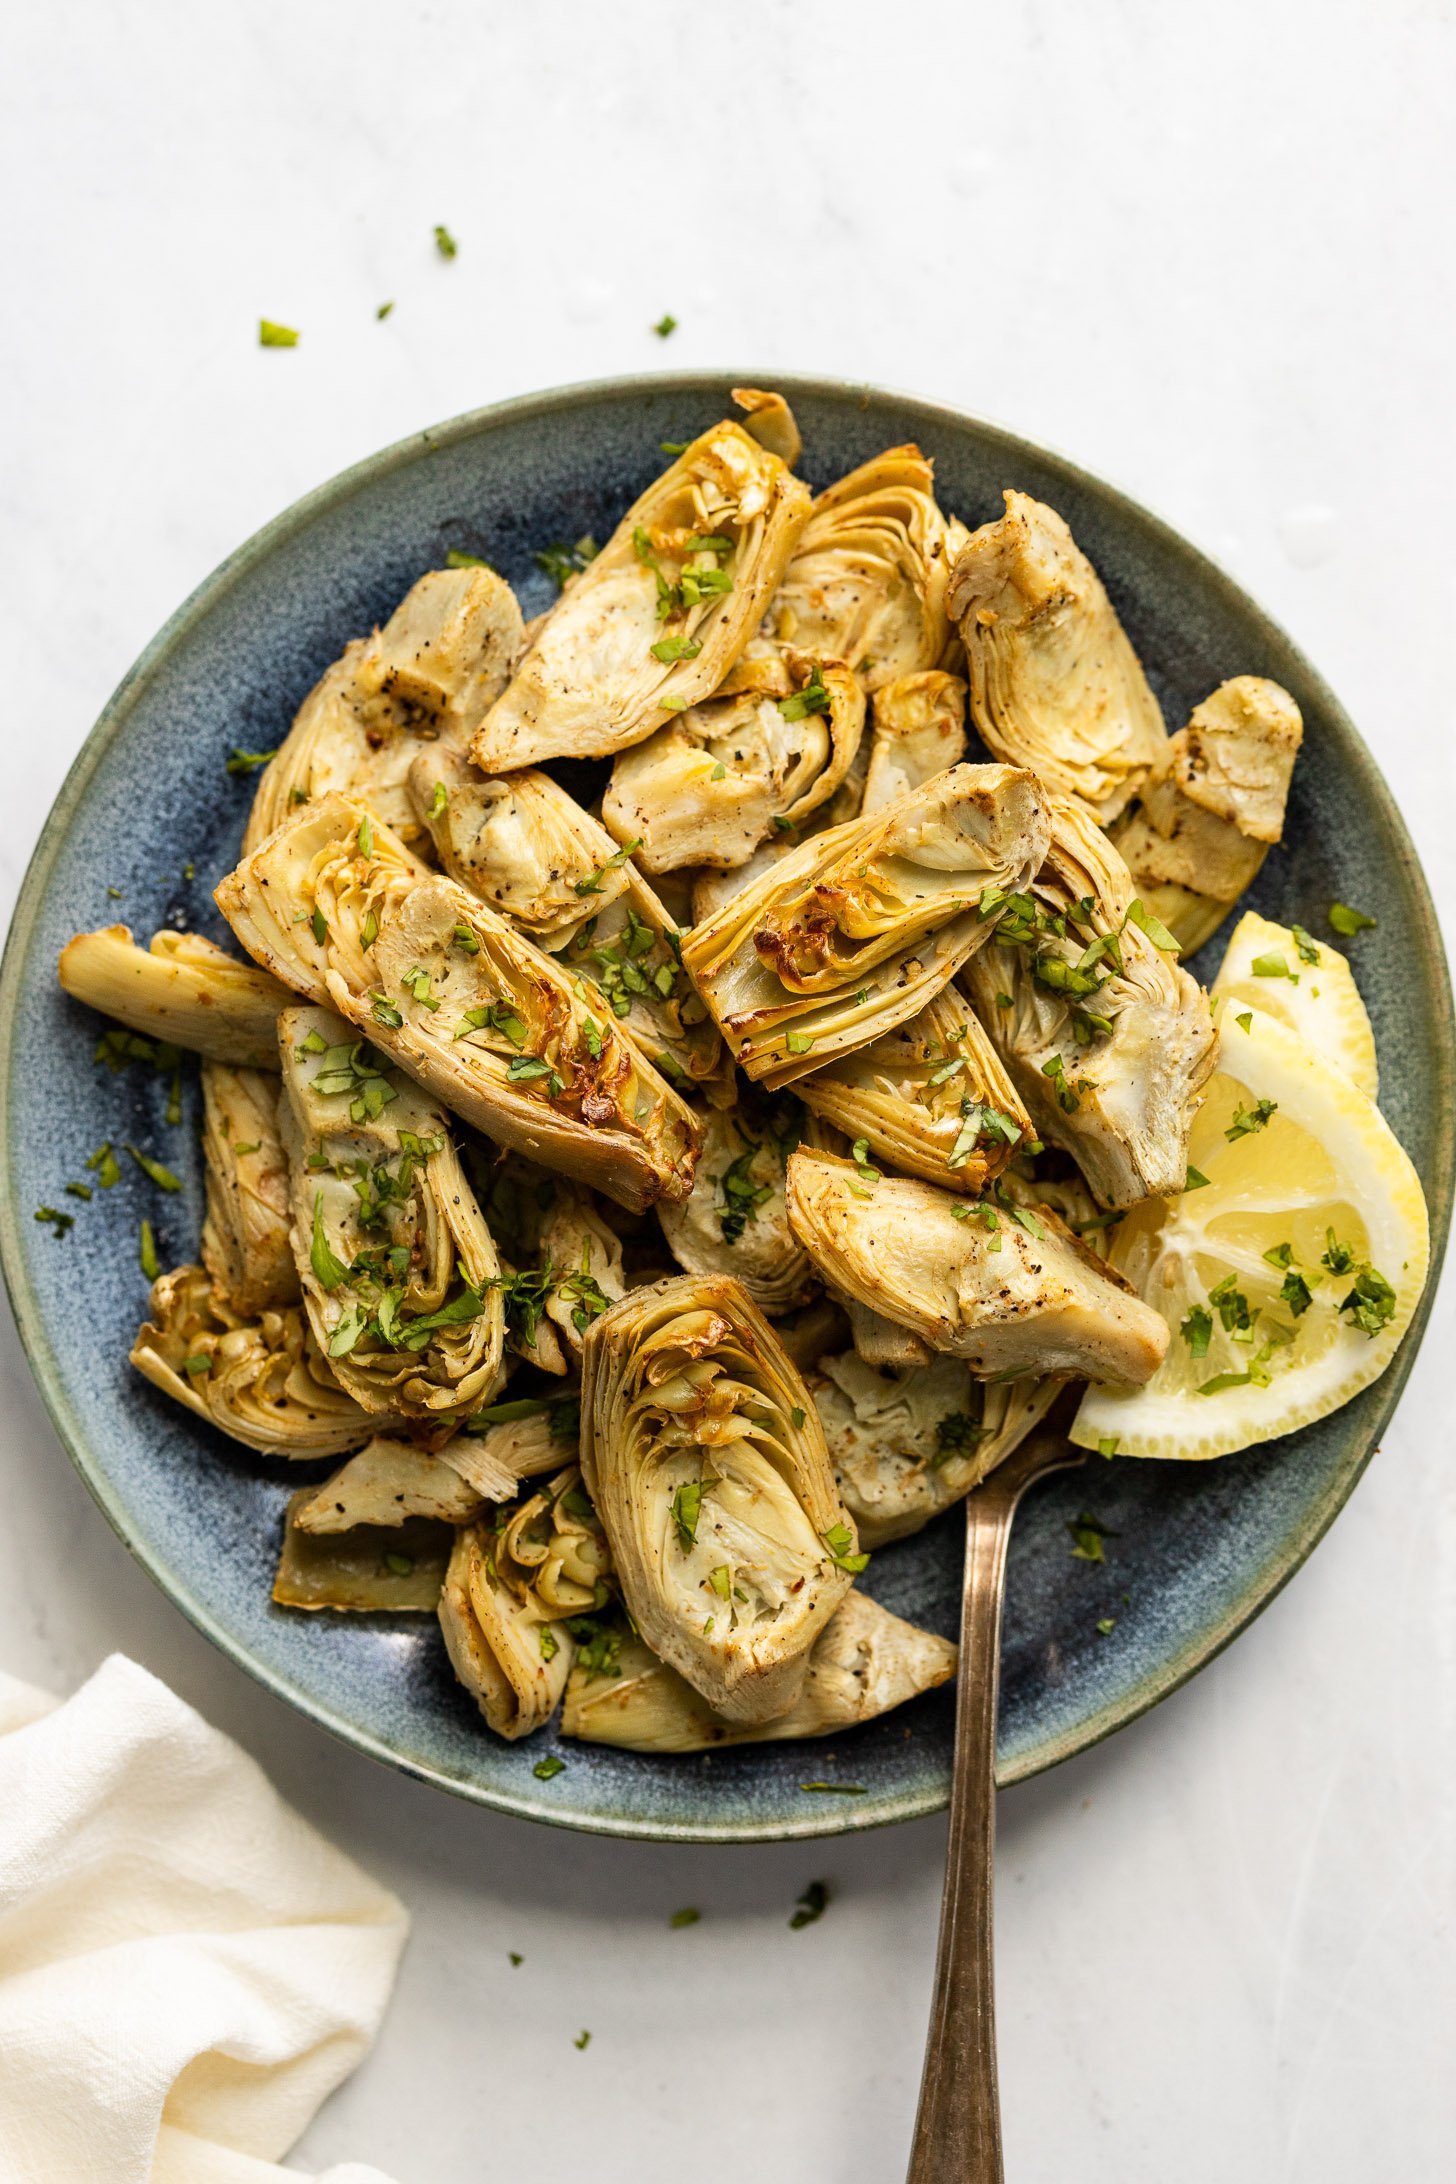 Plate of air fryer frozen artichoke hearts with parsley and lemon.